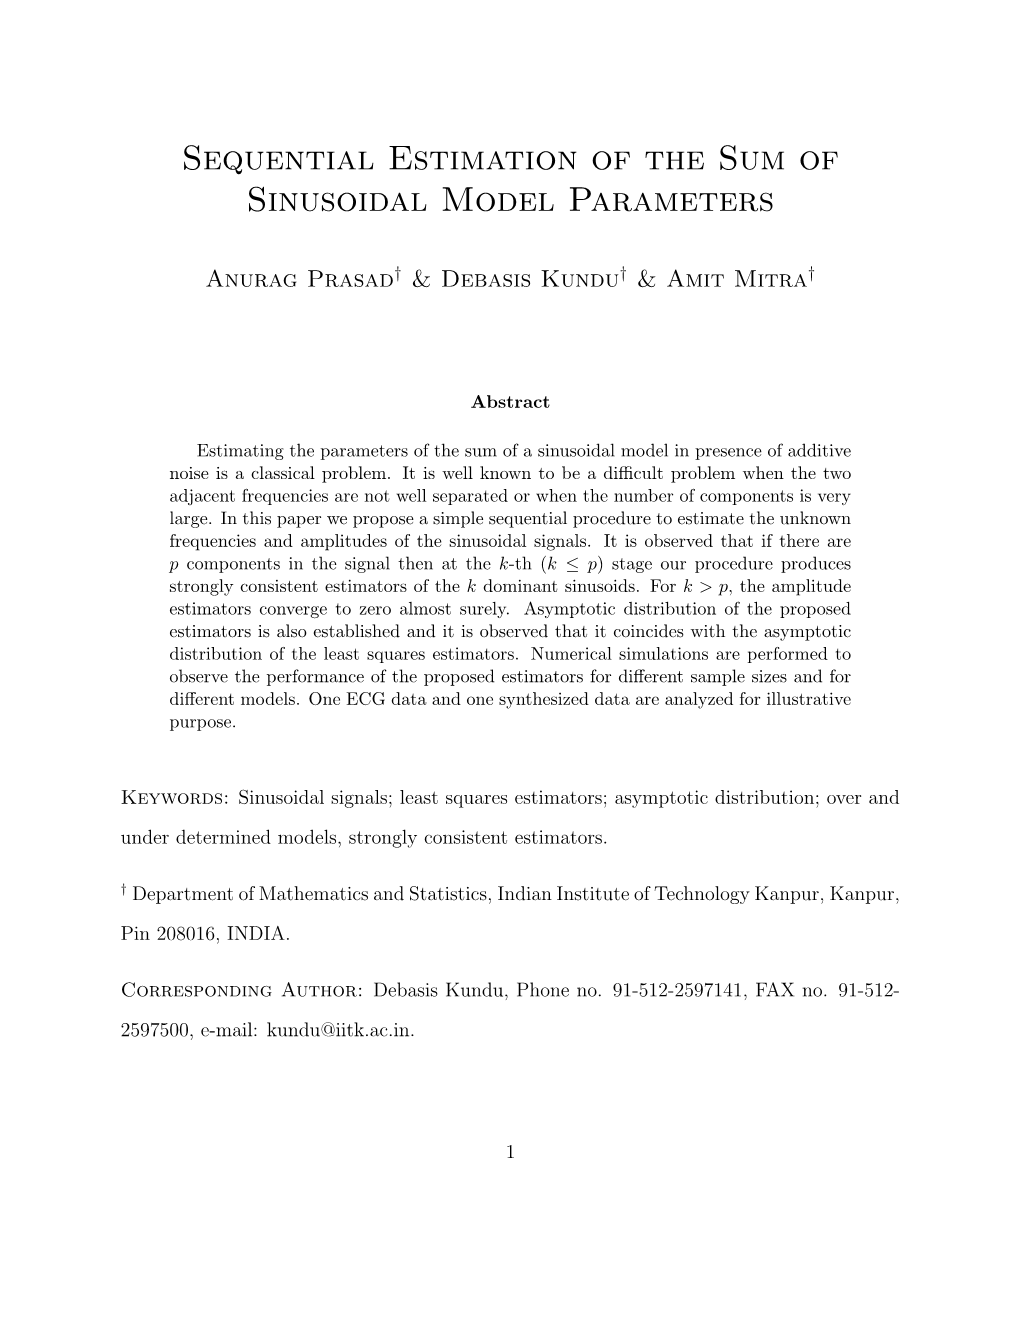 Sequential Estimation of the Sum of Sinusoidal Model Parameters